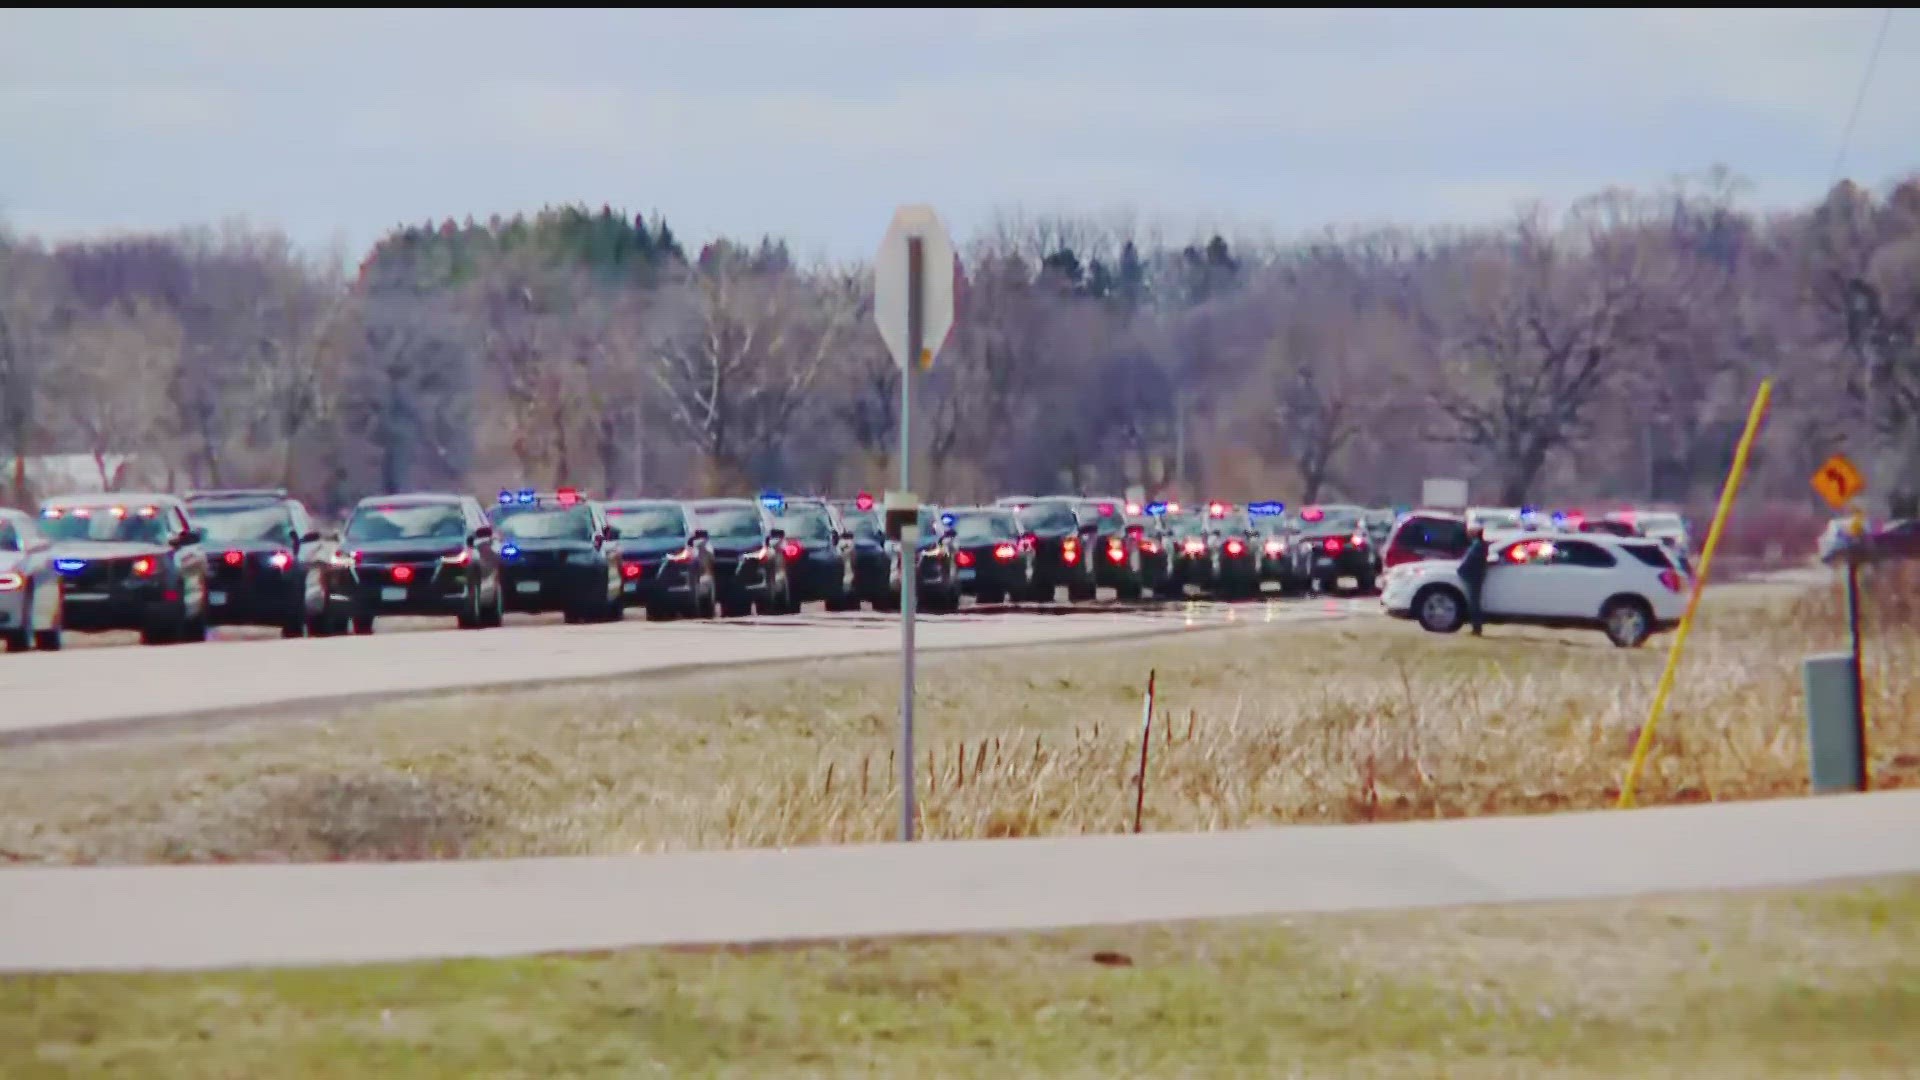 Pope County Deputy Josh Owen was remembered in a funeral service in Glenwood, Minnesota on Saturday, April 22.